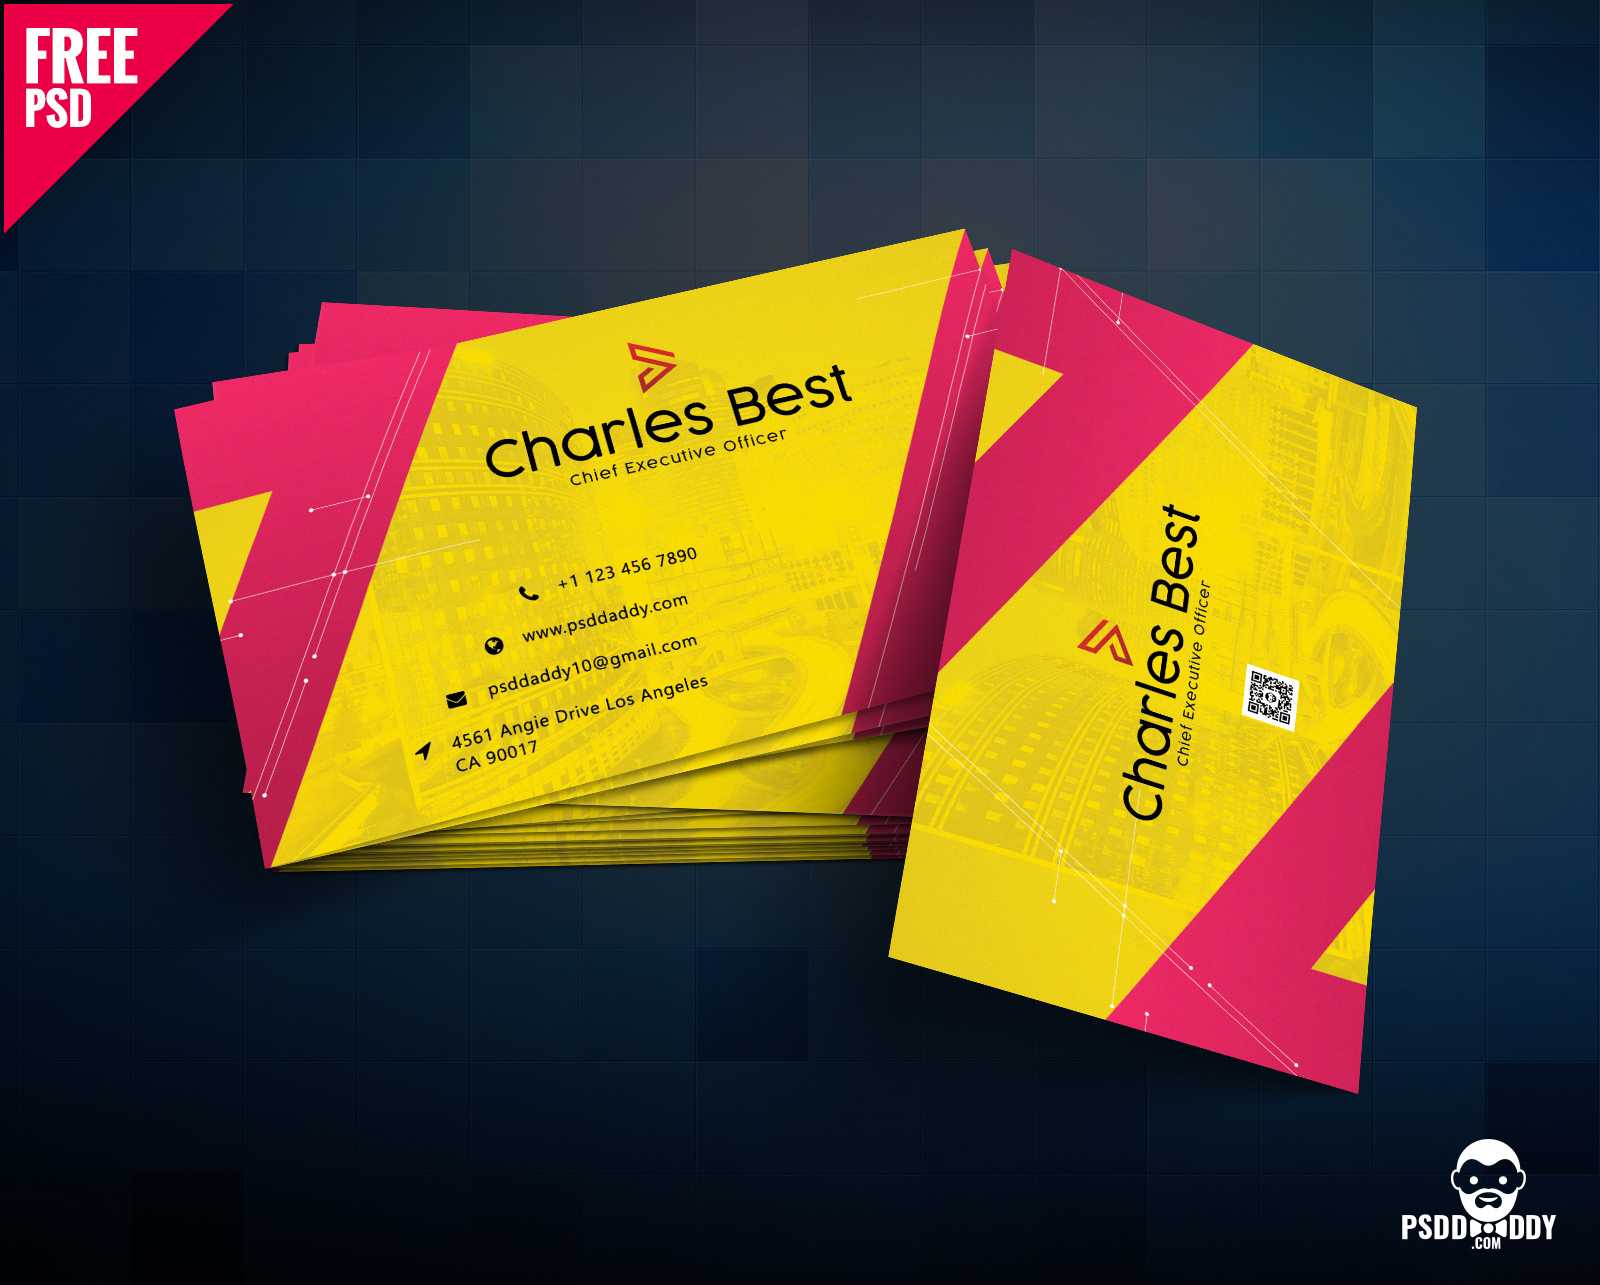 Download] Creative Business Card Free Psd | Psddaddy With Regard To Business Card Maker Template